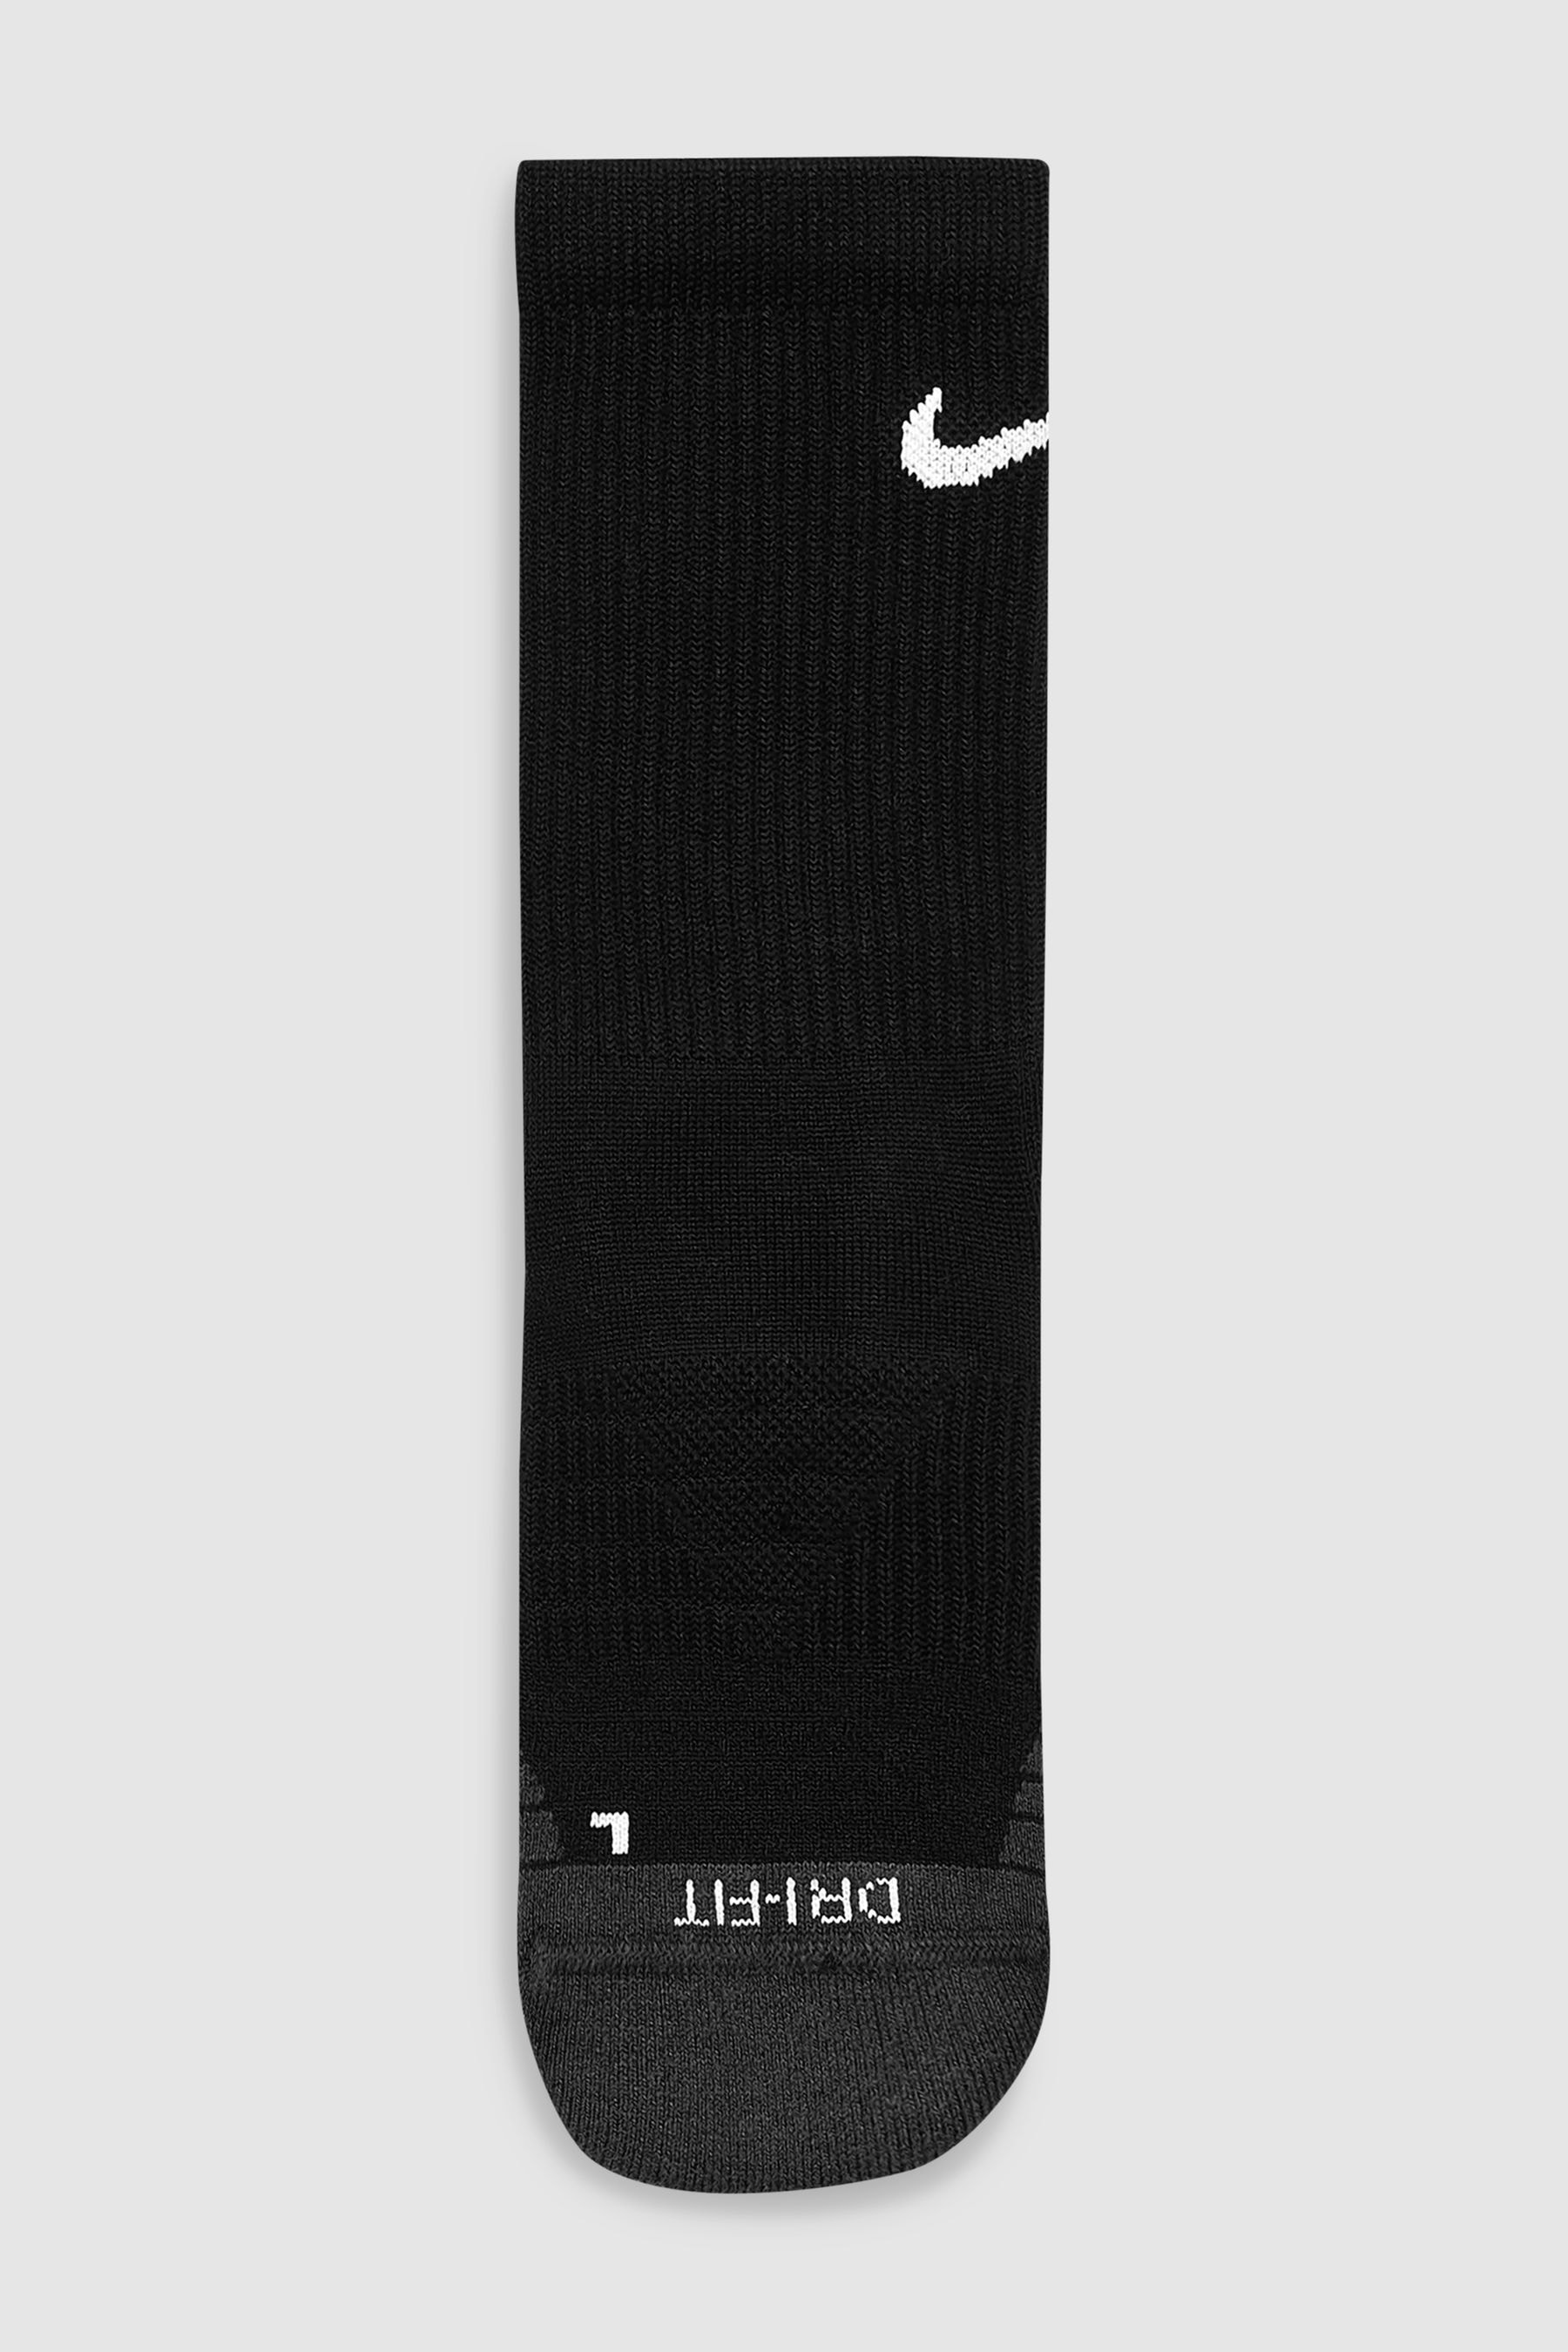 Buy Nike Black 3 Pack Cushioned Crew Socks Adult from the Next UK ...